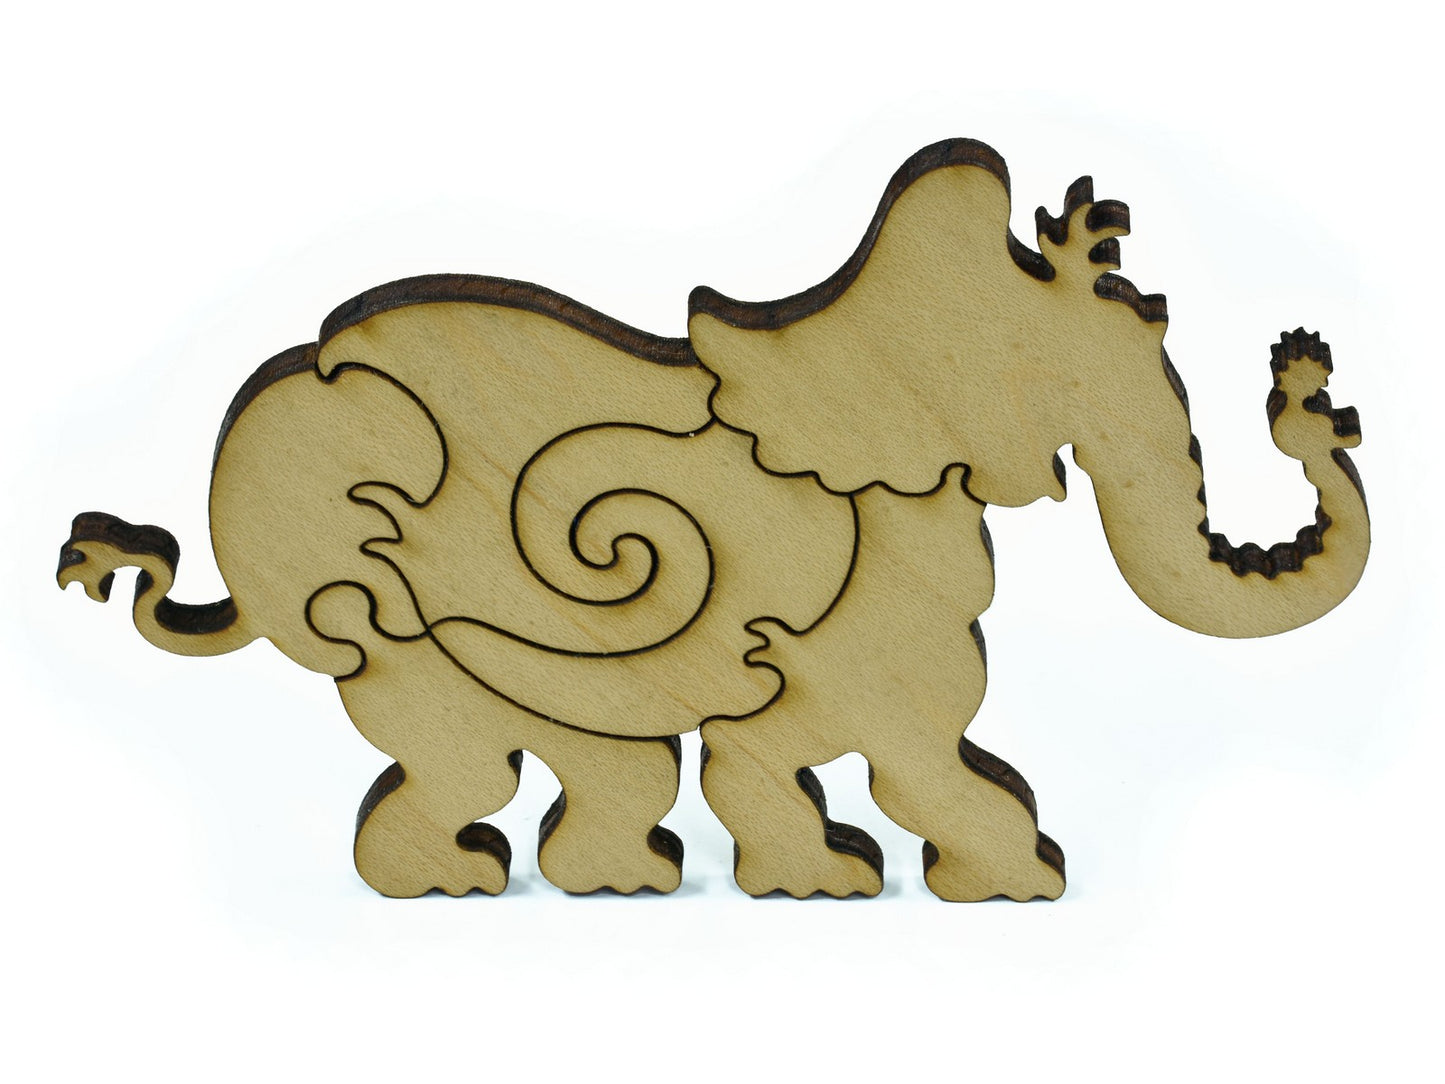 A closeup of pieces in the shape of an elephant.